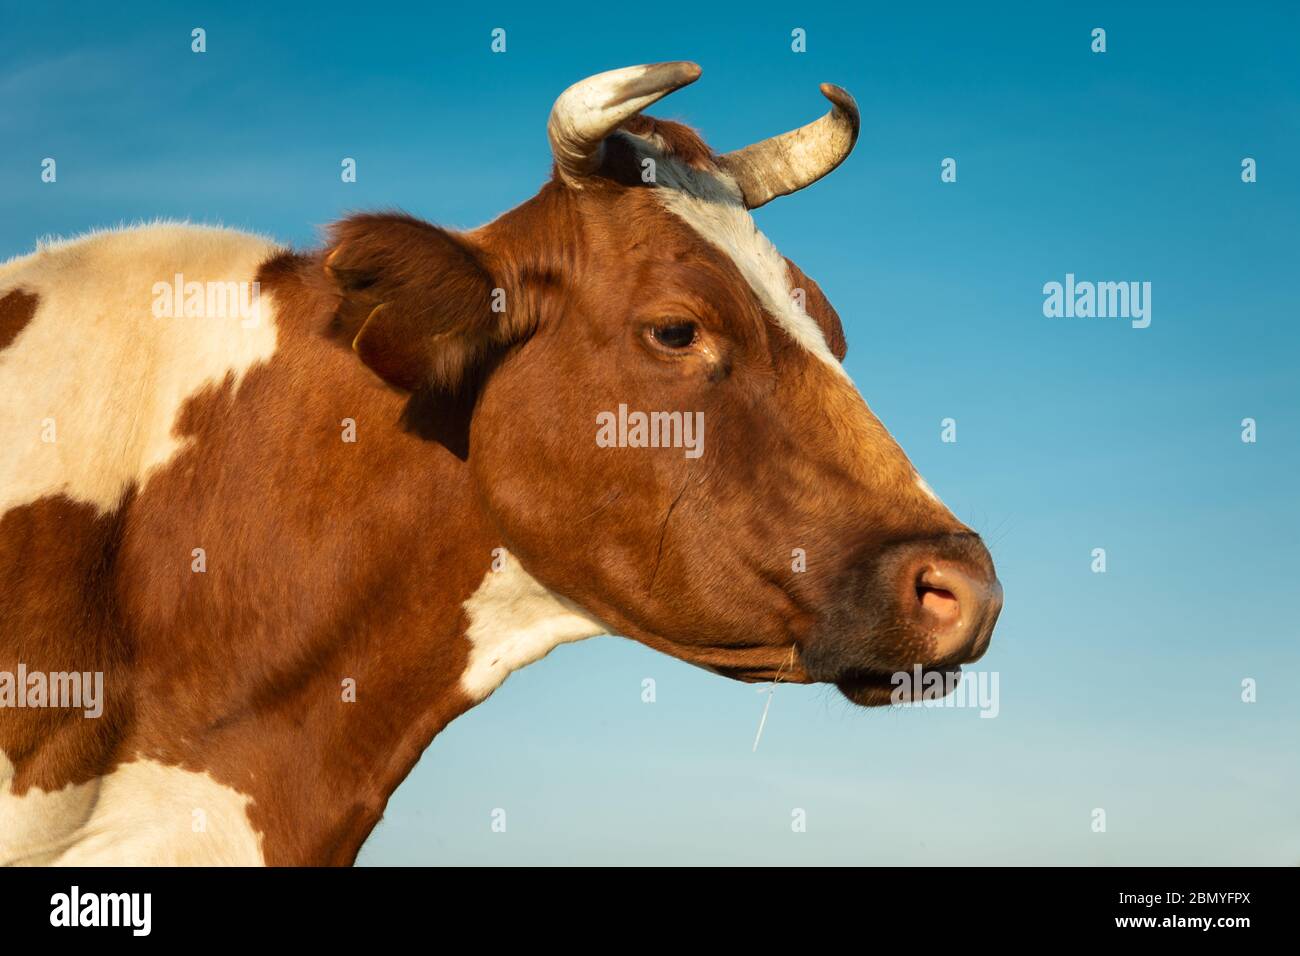 A close-up of the head of an adult white-brown cow and blue sky Stock Photo